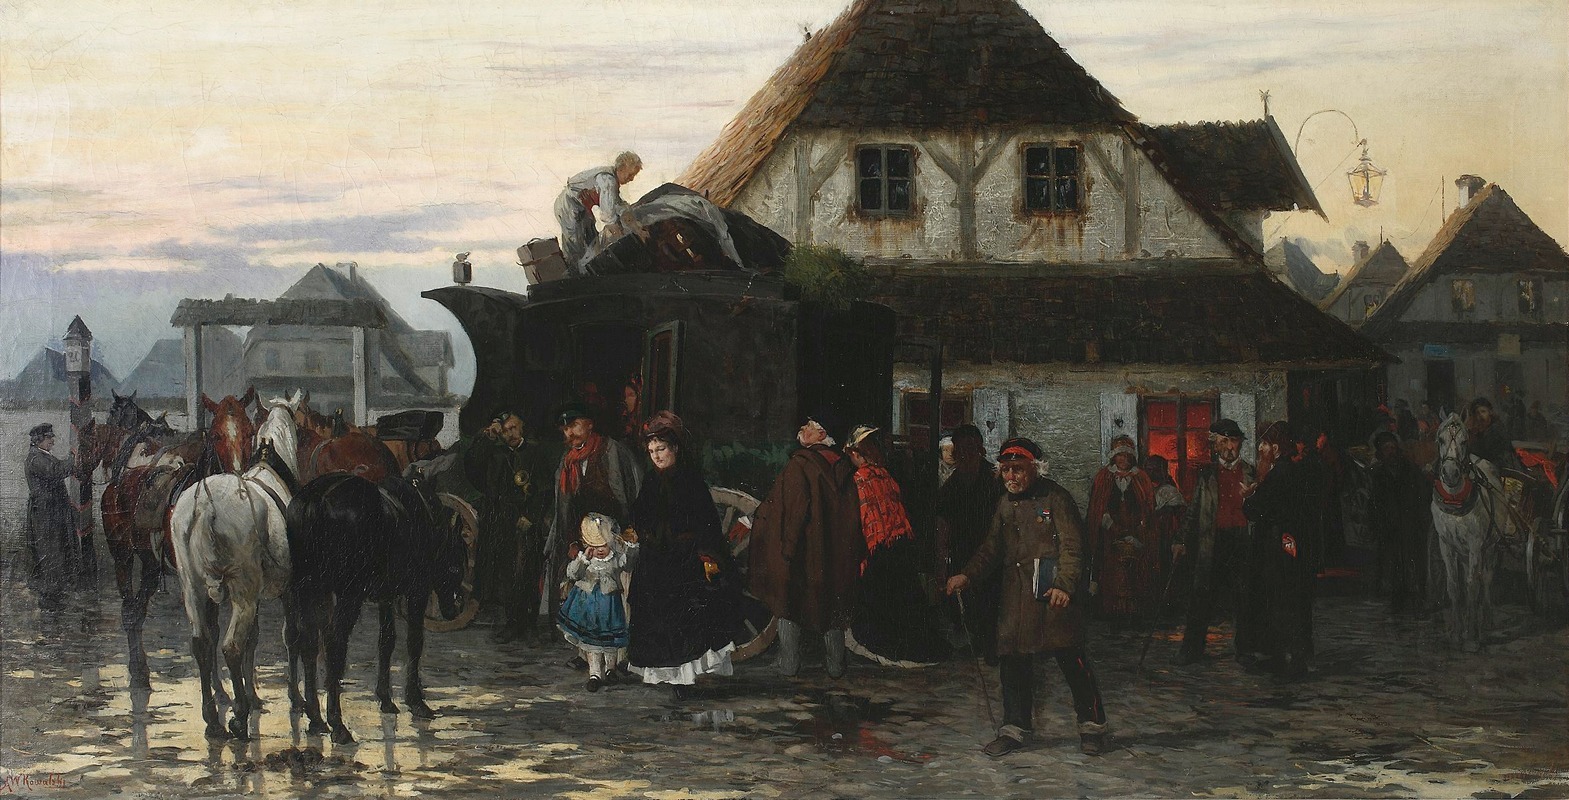 Alfred Von Wierusz-Kowalski - Arrival of a post chaise in a country town